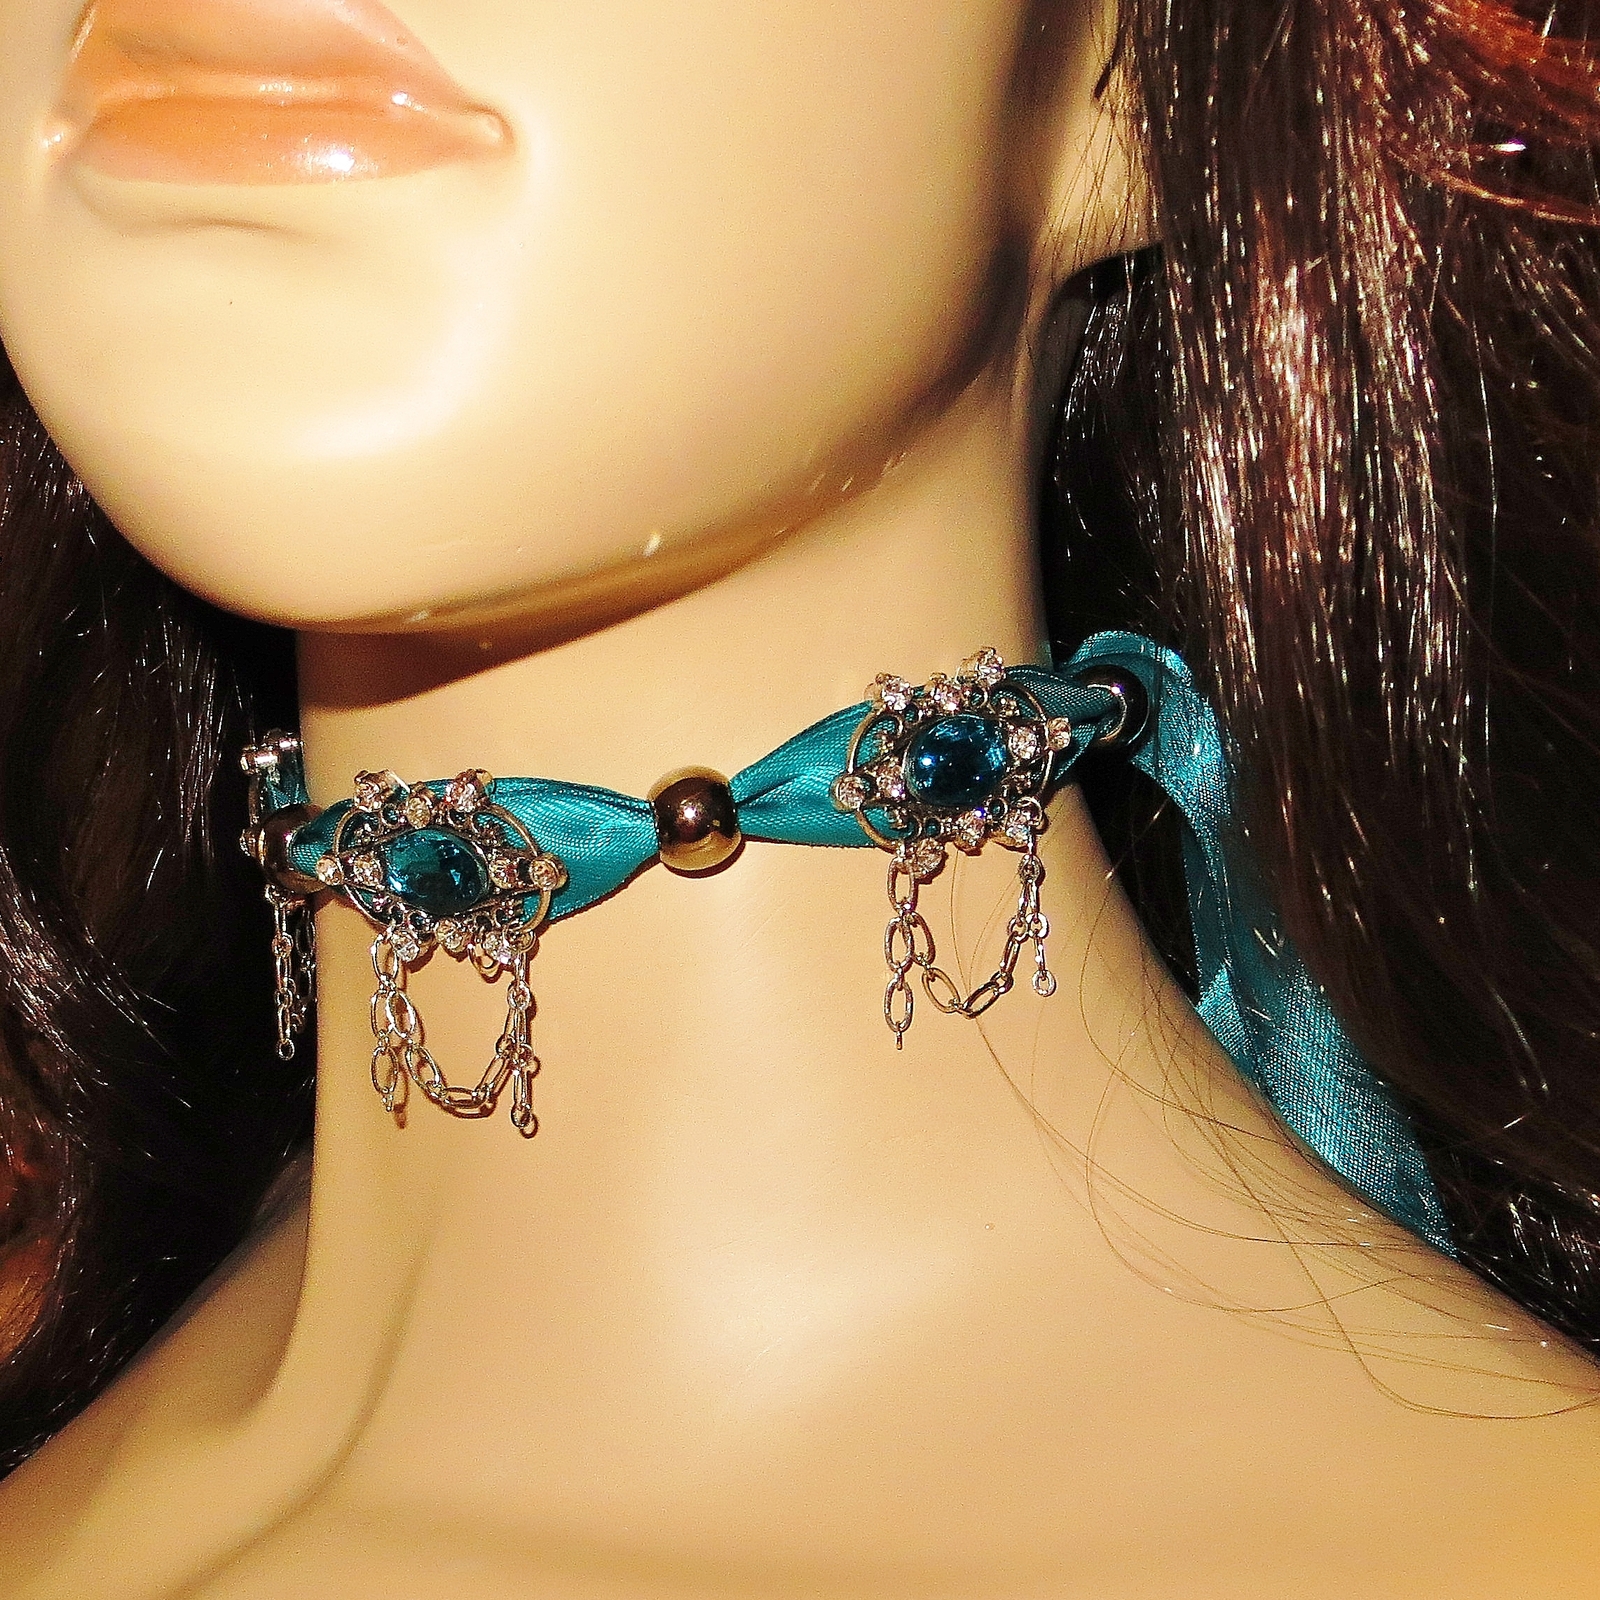 Sparkling Teal Crystalled Ultra Soft Ribbon Choker Necklace - Heavy Weight - $51.50